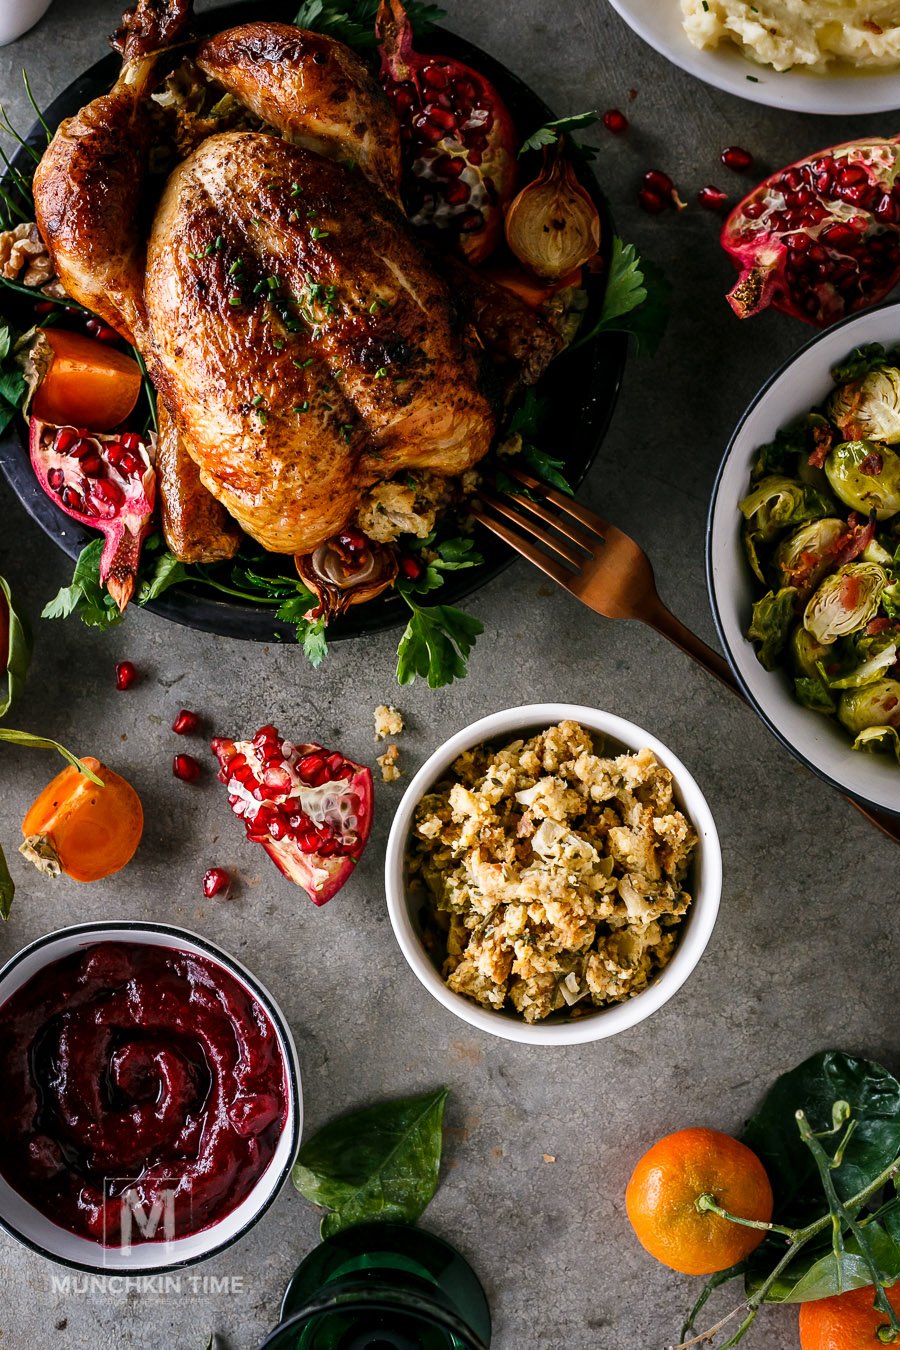 2017 Thanksgiving Dinner Ideas - here are 7 delicious Thanksgiving dishes that you can bring to the table this holiday season. 